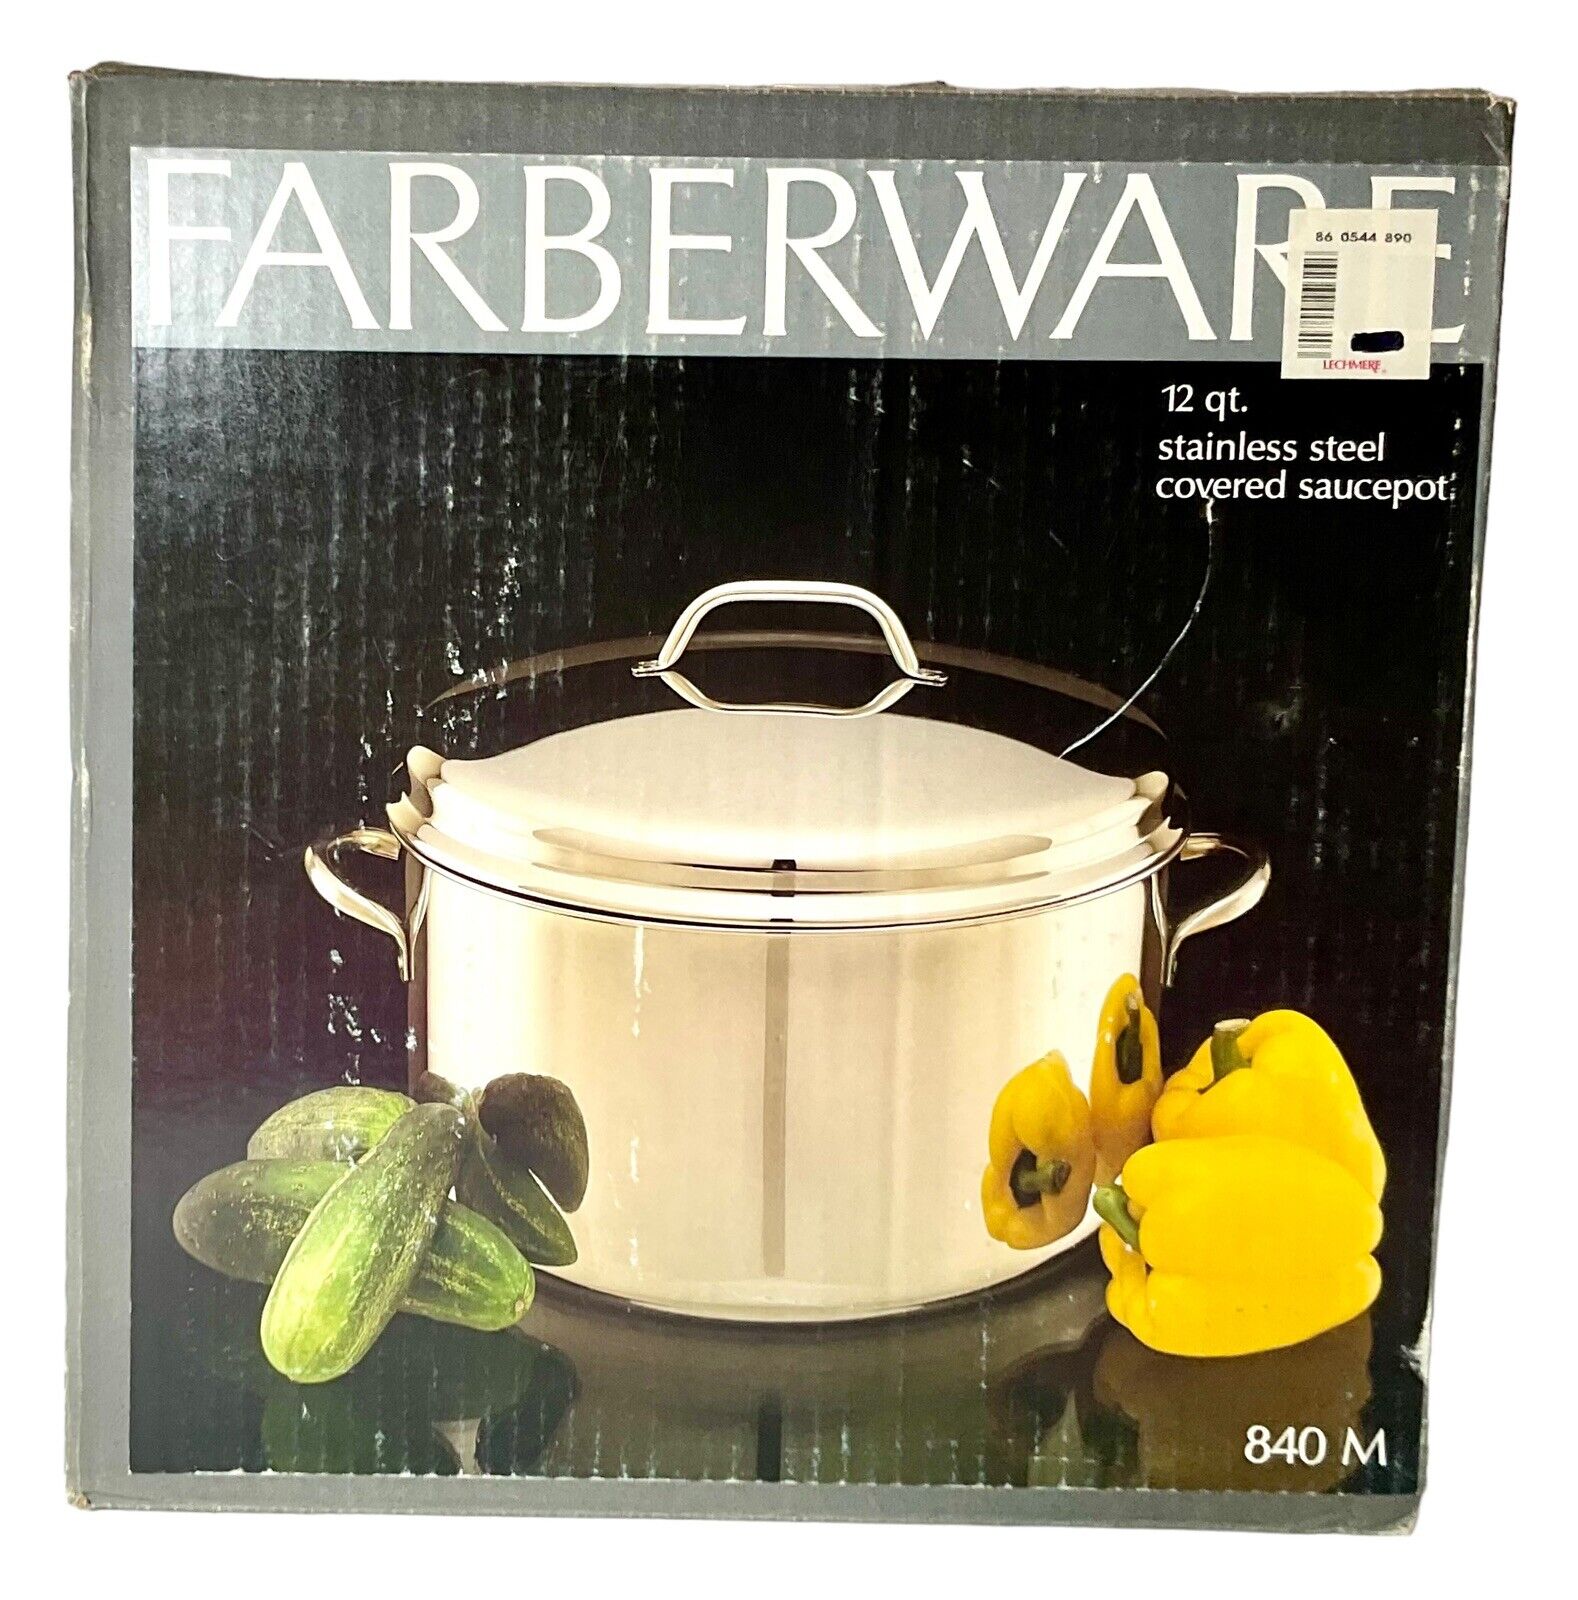 Vintage Faberware 16 QT Stainless Steal Sauce Pot Model 840M NEW IN BOX